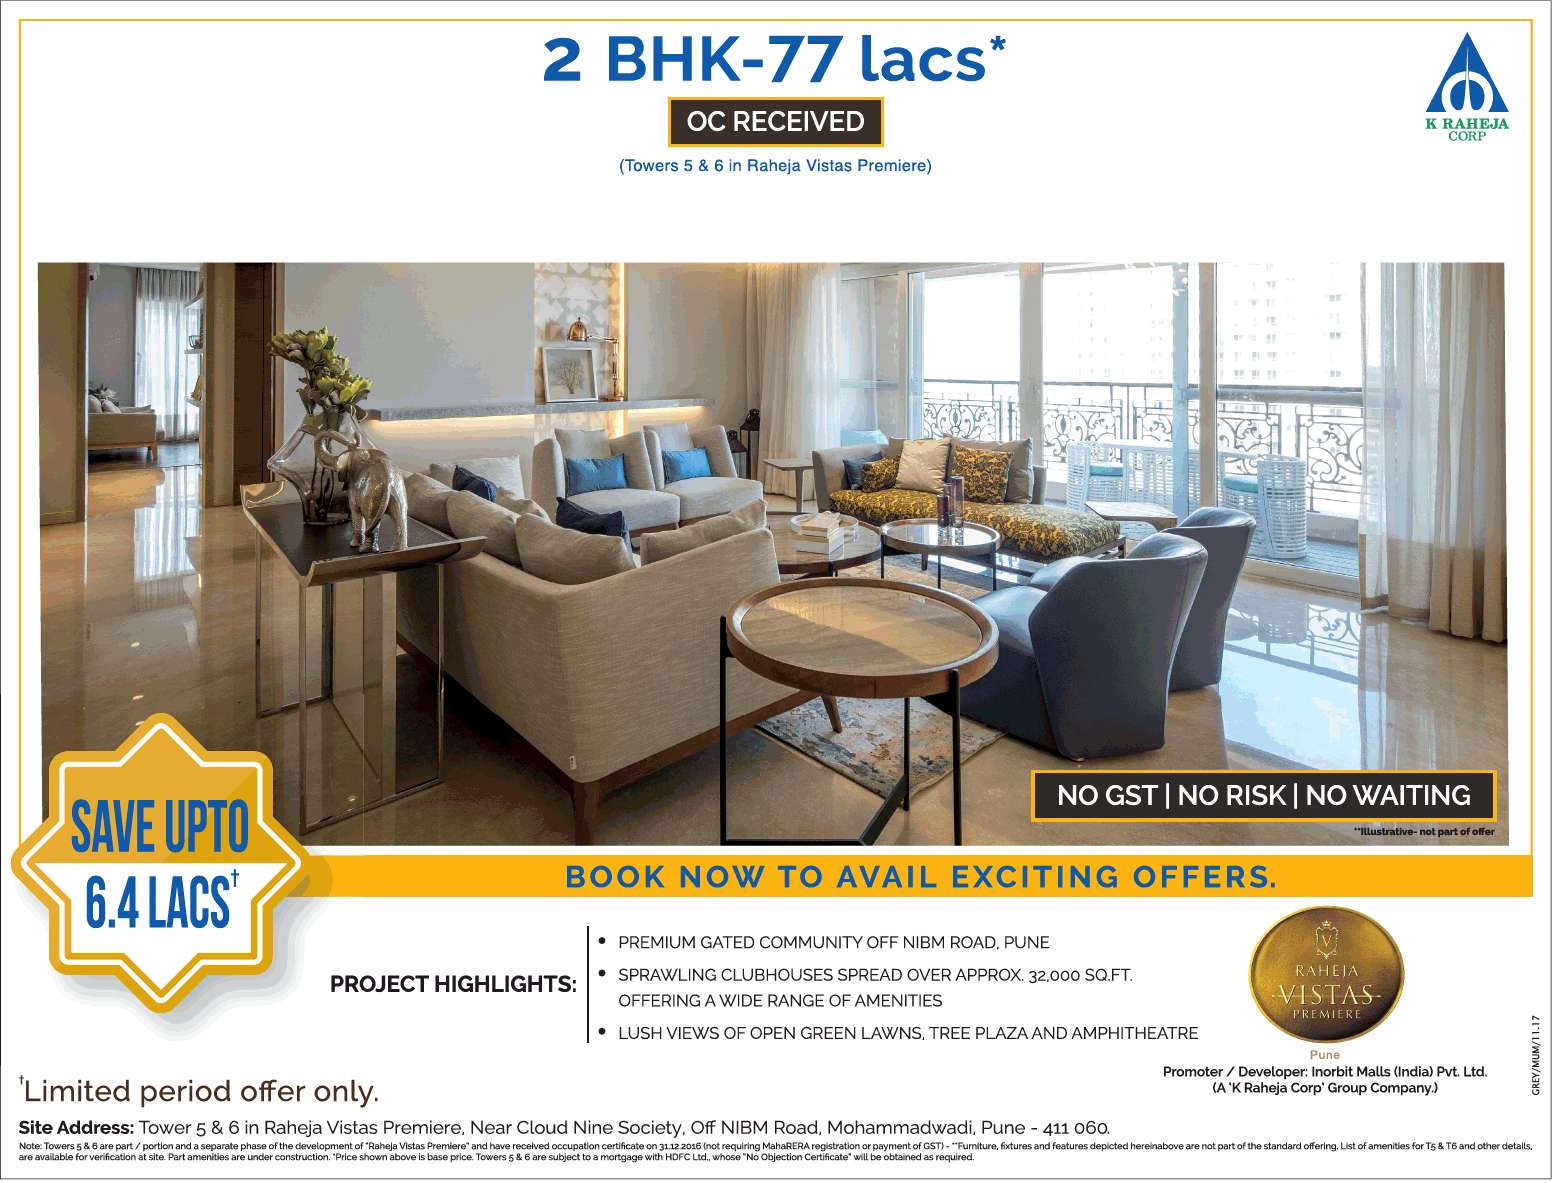 Book homes now to avail exciting offers at K Raheja Vistas in Pune